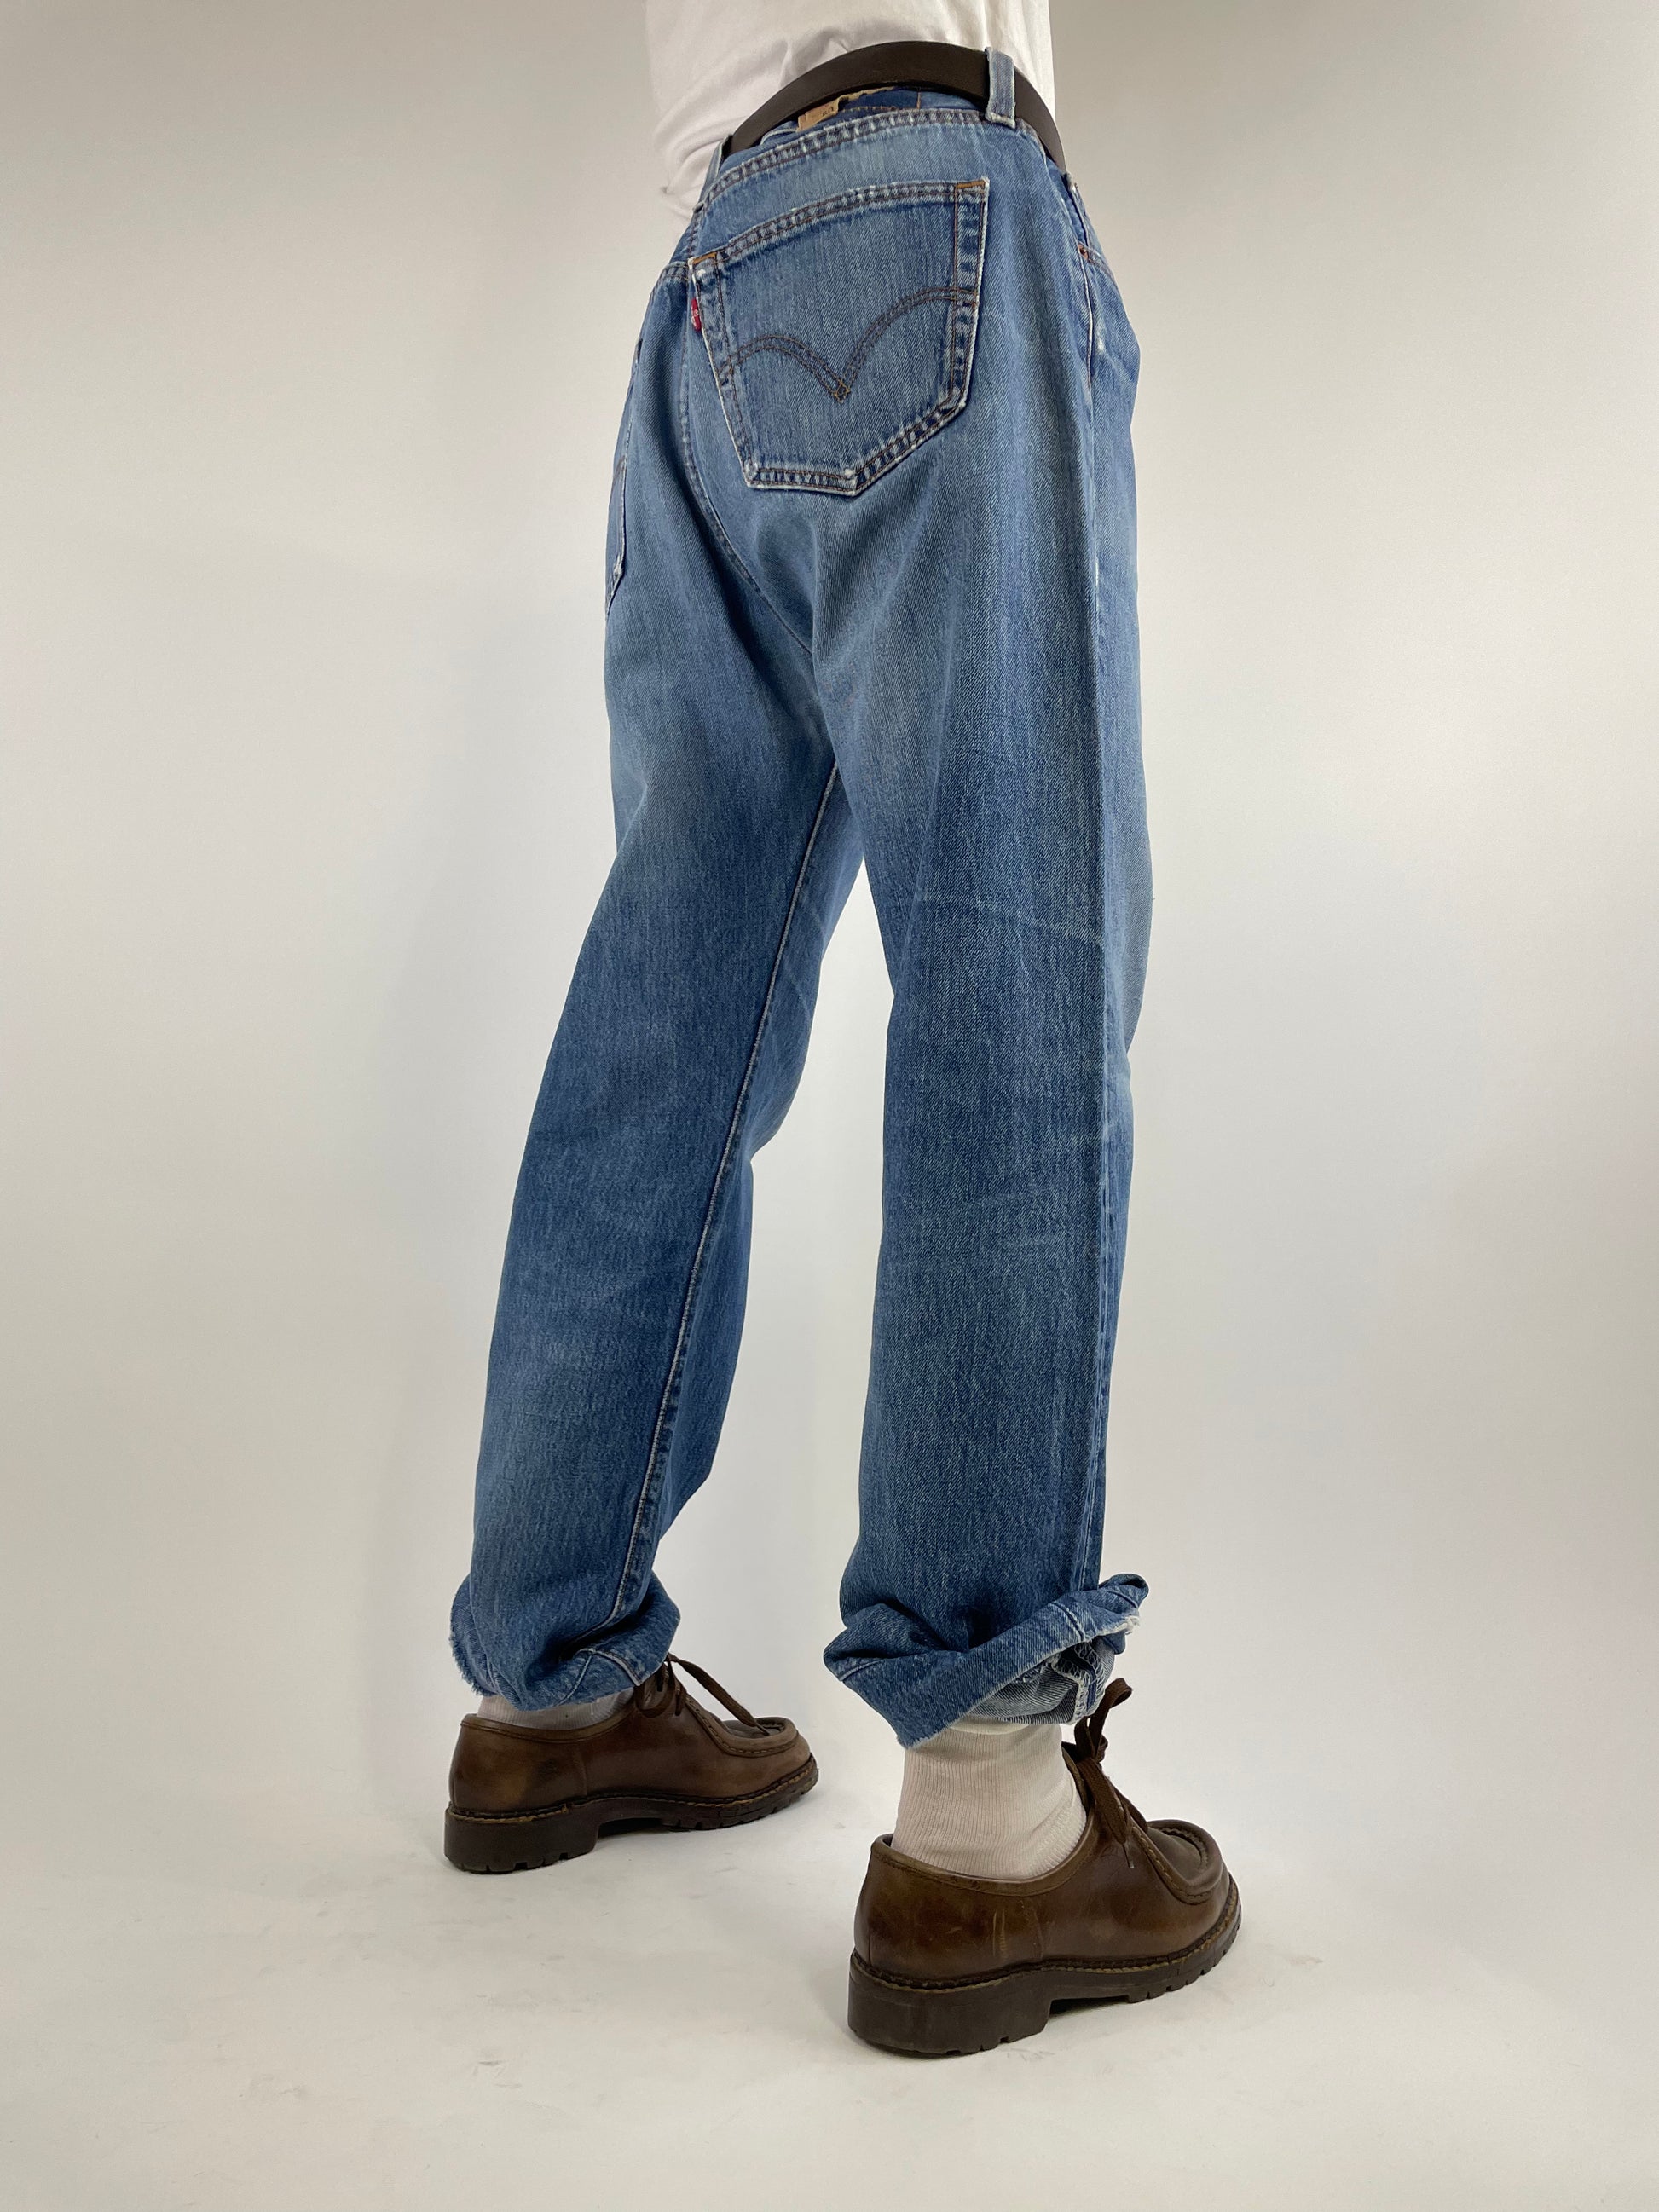 levis-501-red-tap-blue-jeans